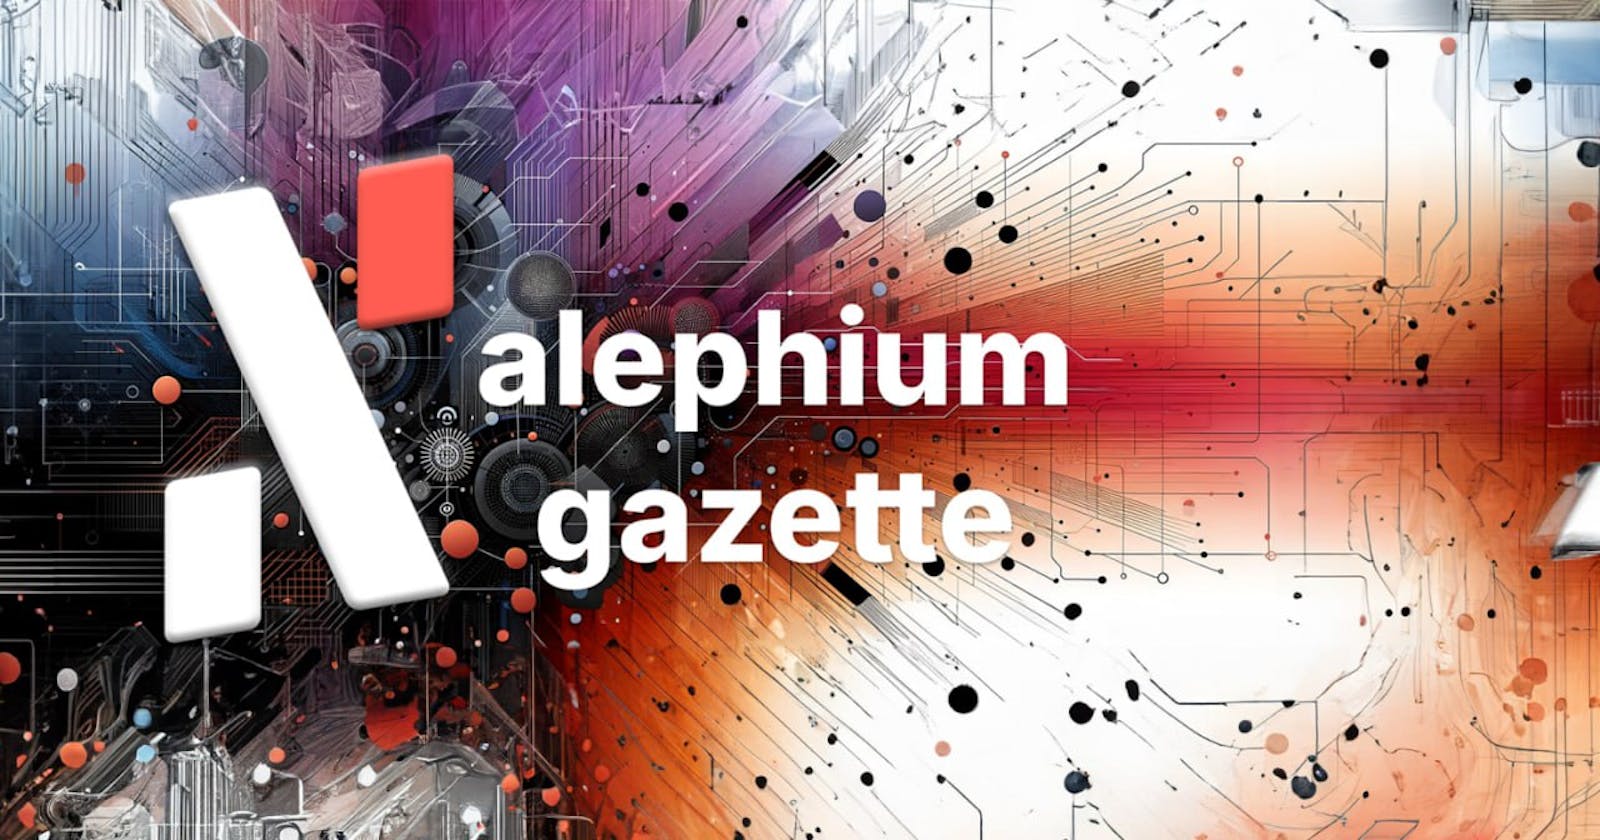 Alephium Gazette: A Month of Milestones and the Road Ahead